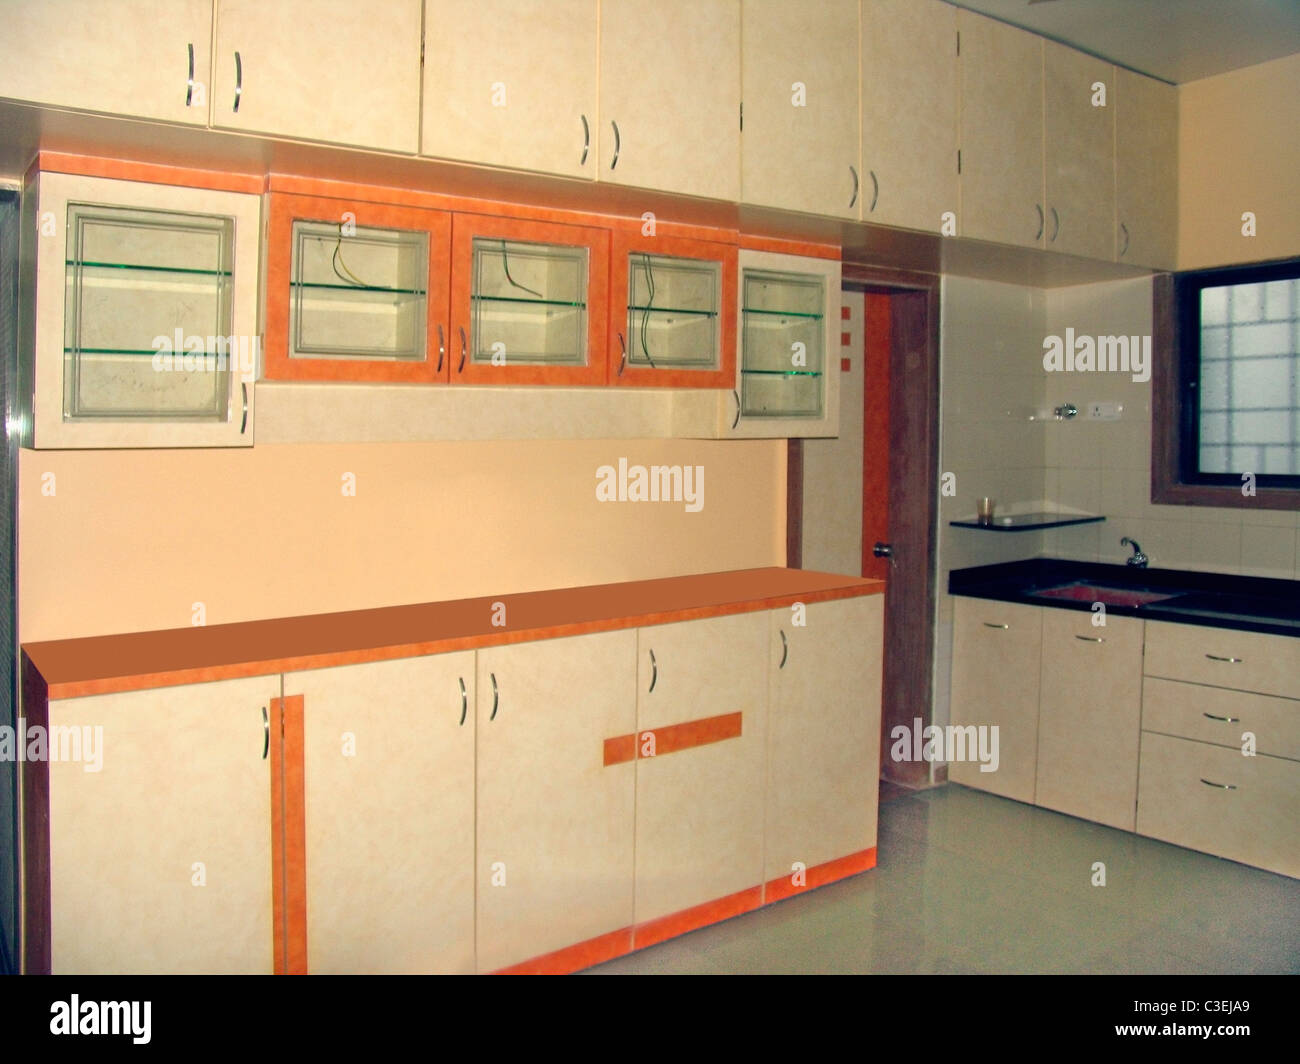 Interior Of A Kitchen In A Flat At Pune Pune Maharashtra